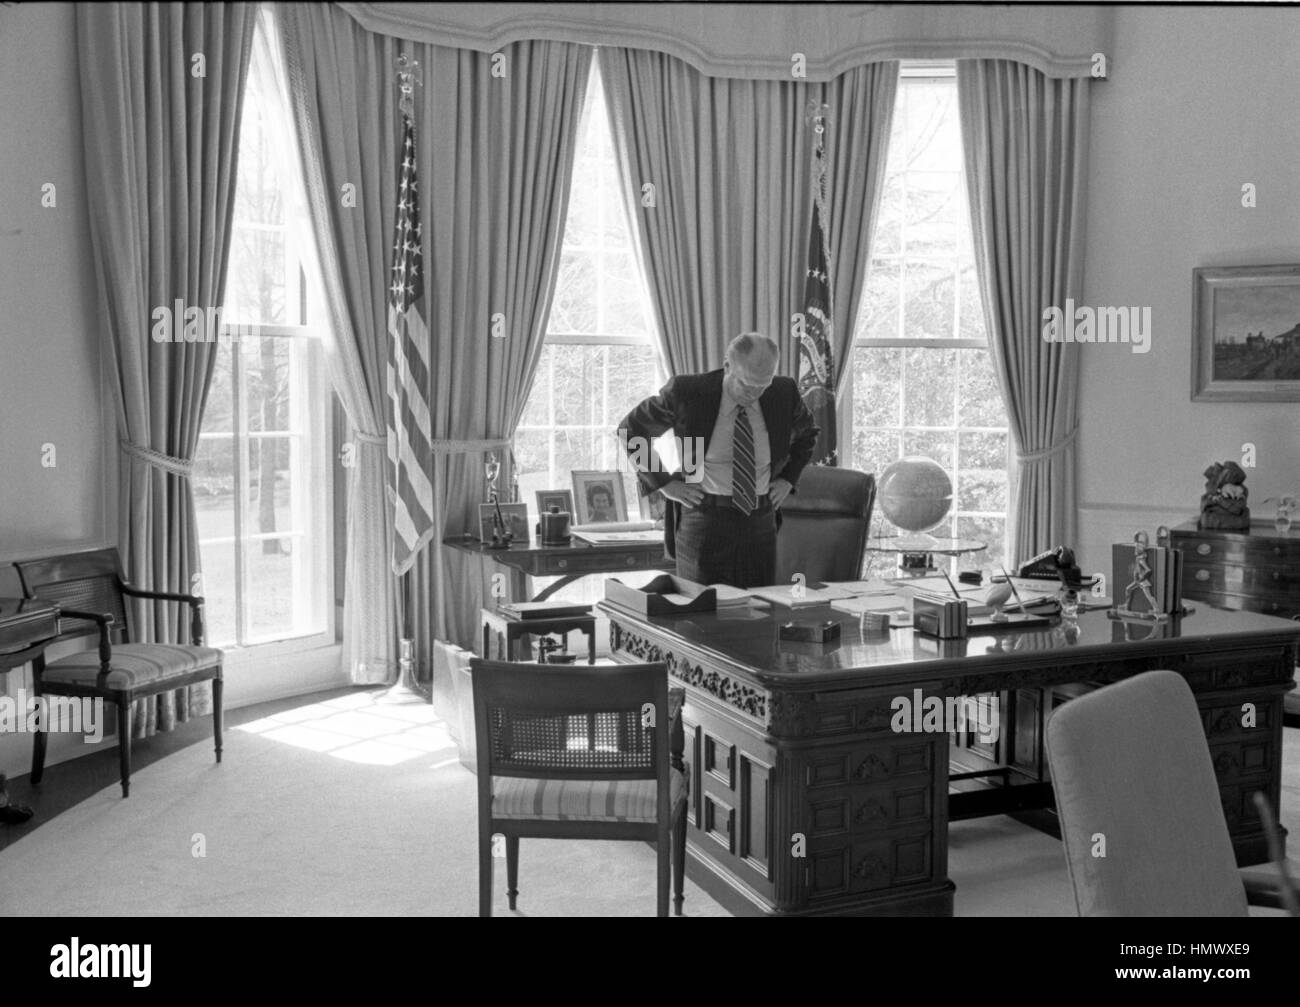 https://c8.alamy.com/comp/HMWXE9/us-president-gerald-ford-works-standing-behind-his-desk-in-the-oval-HMWXE9.jpg